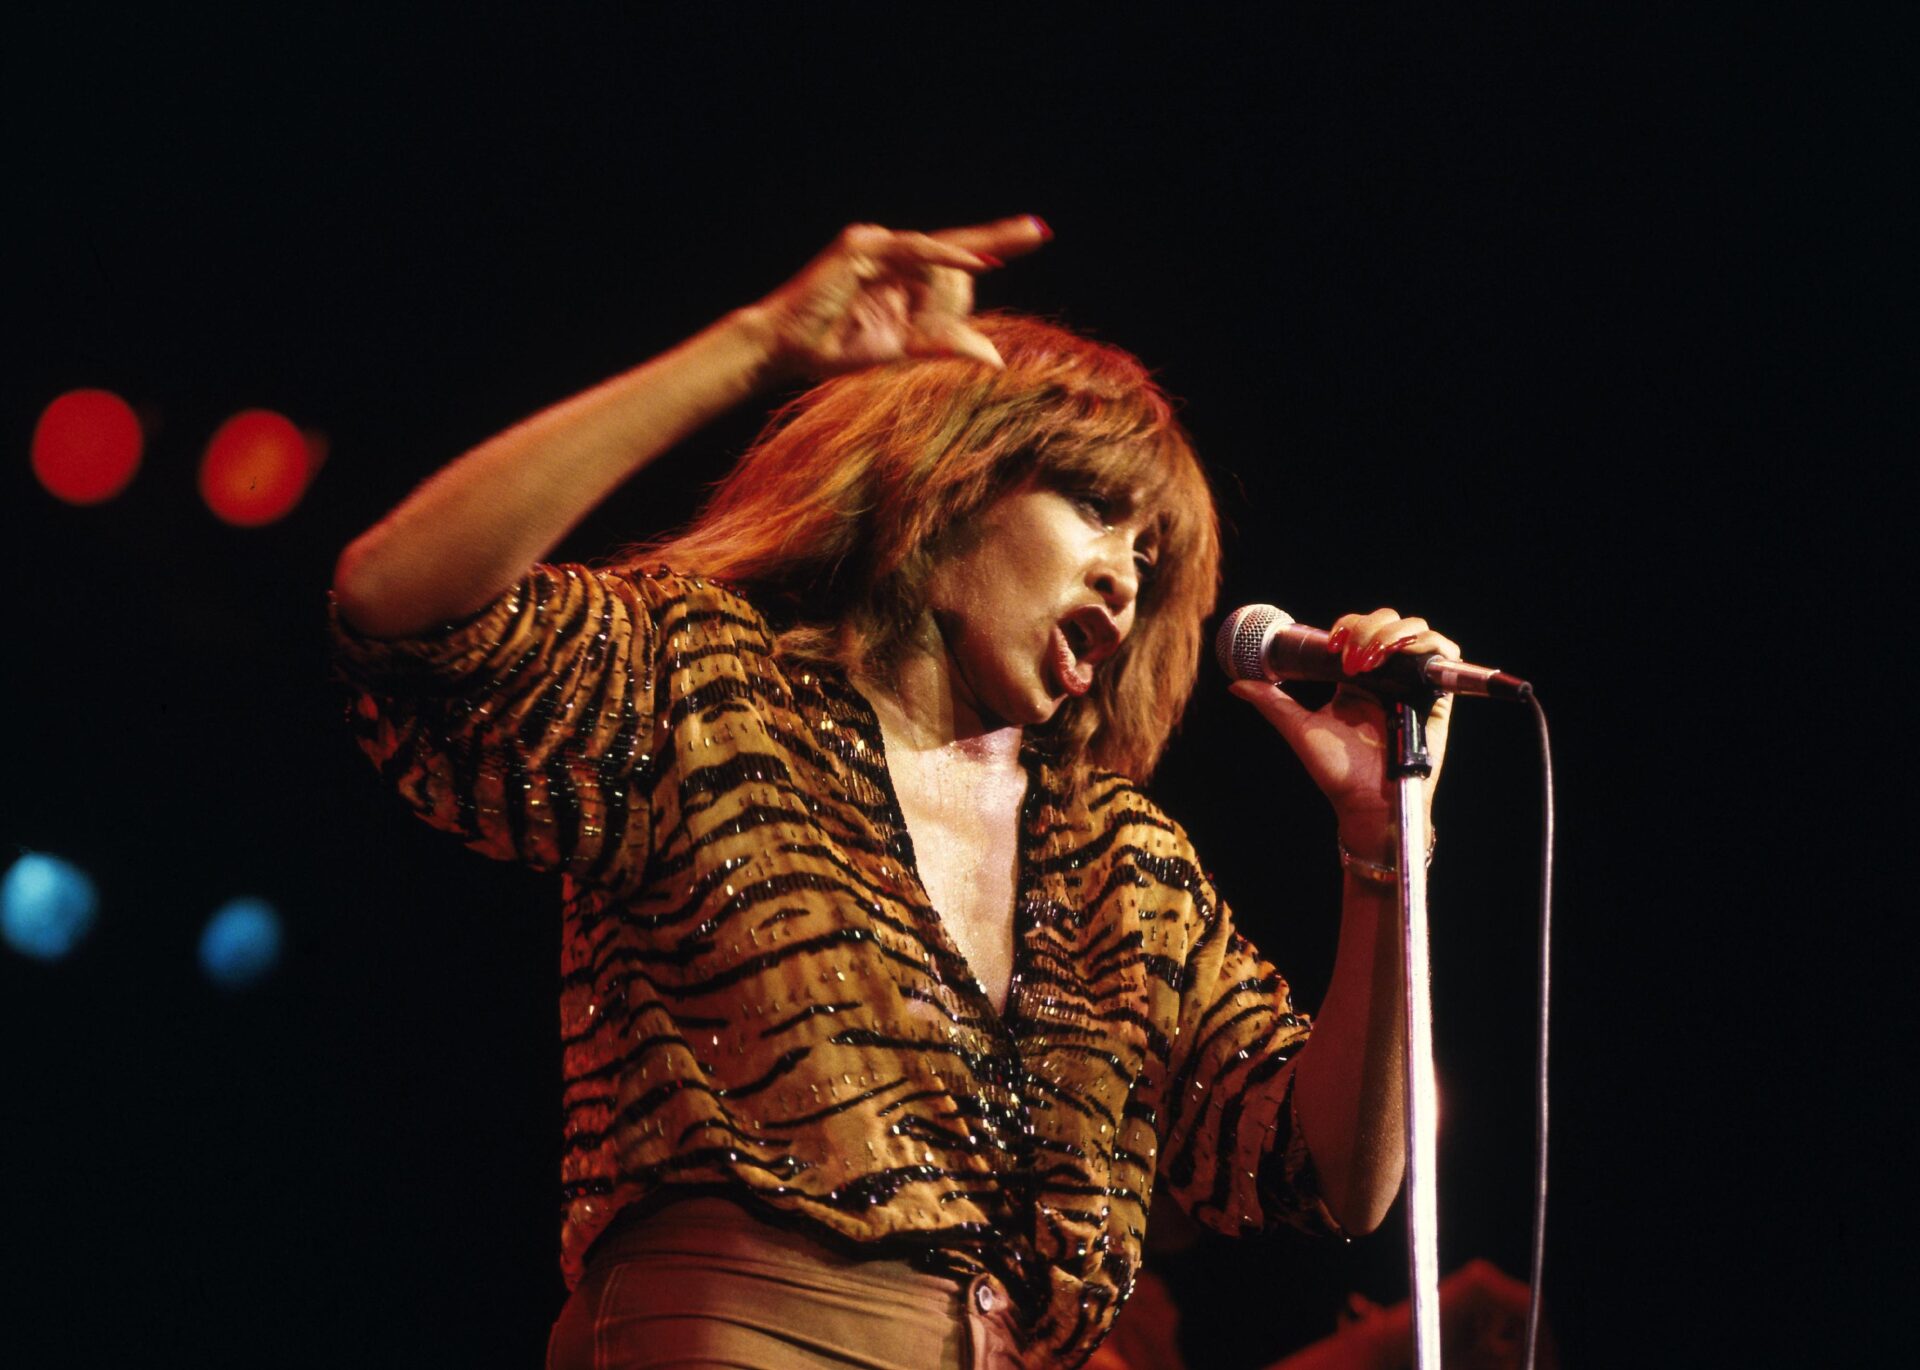 Tina Turner performs live on stage at Hammersmith Odeon in London - David Redfern // Getty Images